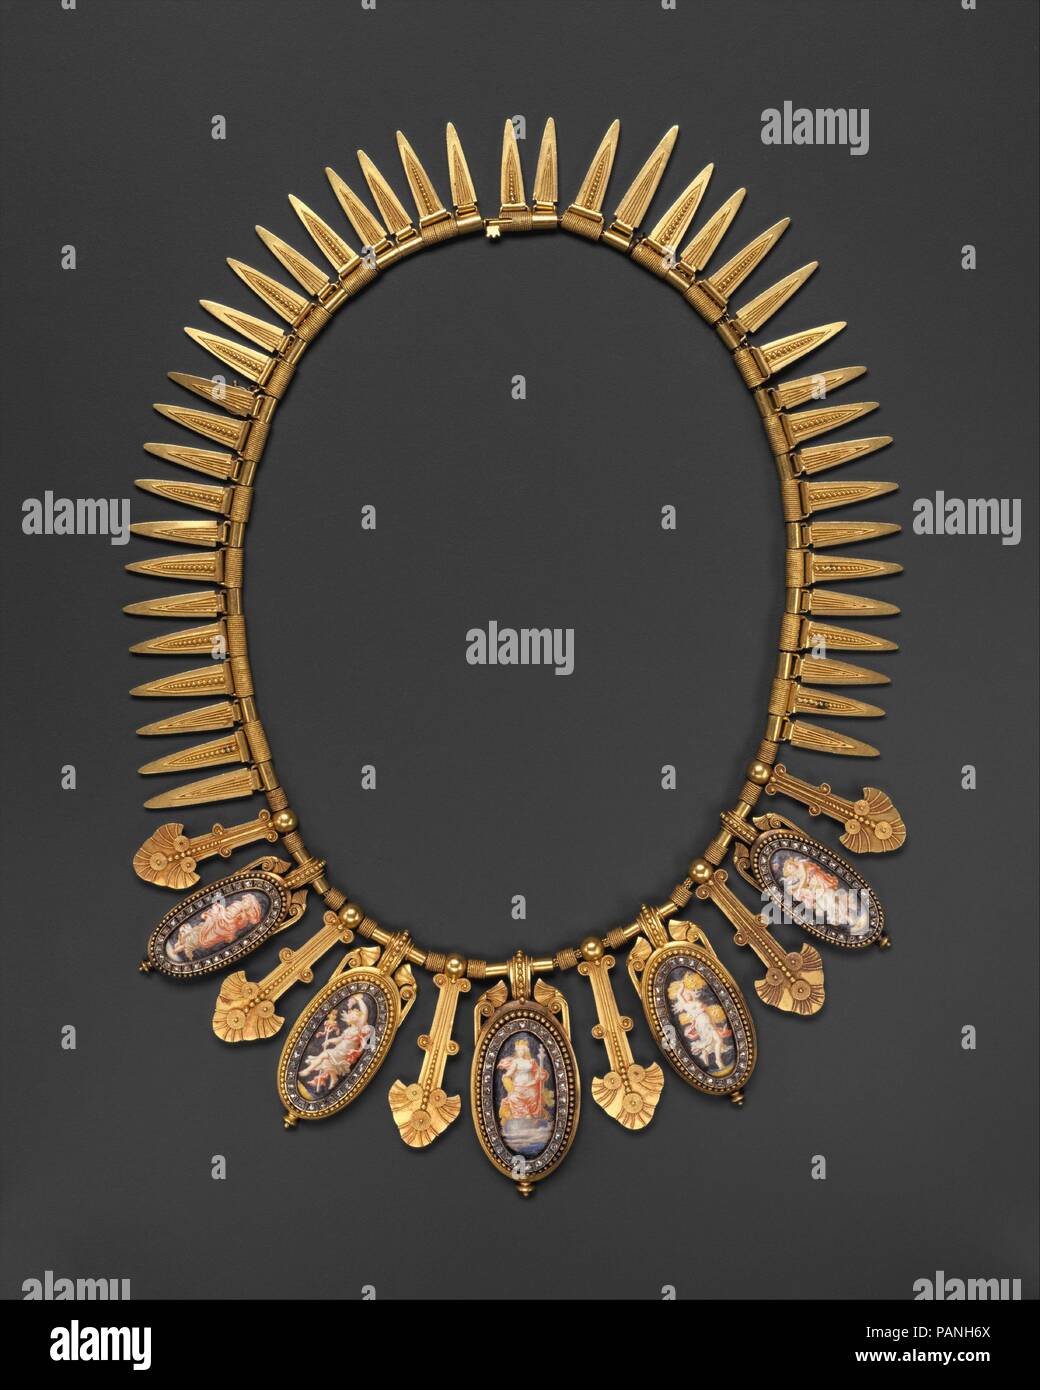 Necklace. Artist: Eugêne Fontenay (French, 1823-1887). Culture: French, Paris. Dimensions: L. 16-3/8 in. (41.6 cm.). Date: ca. 1870.  This gold chain has five oval enameled pendants depicting personifications of Europe and the Seasons. Each oval is framed in diamonds interspersed with long stylized palmette-shaped pendants, and forty-one leaf-shaped pendants, decorated with granulation and wirework suspended from alternately plain and coiled tubular links.  The use of granulation and images of classical maidens, as well as the overall organization, demonstrate the designer's dependence upon an Stock Photo